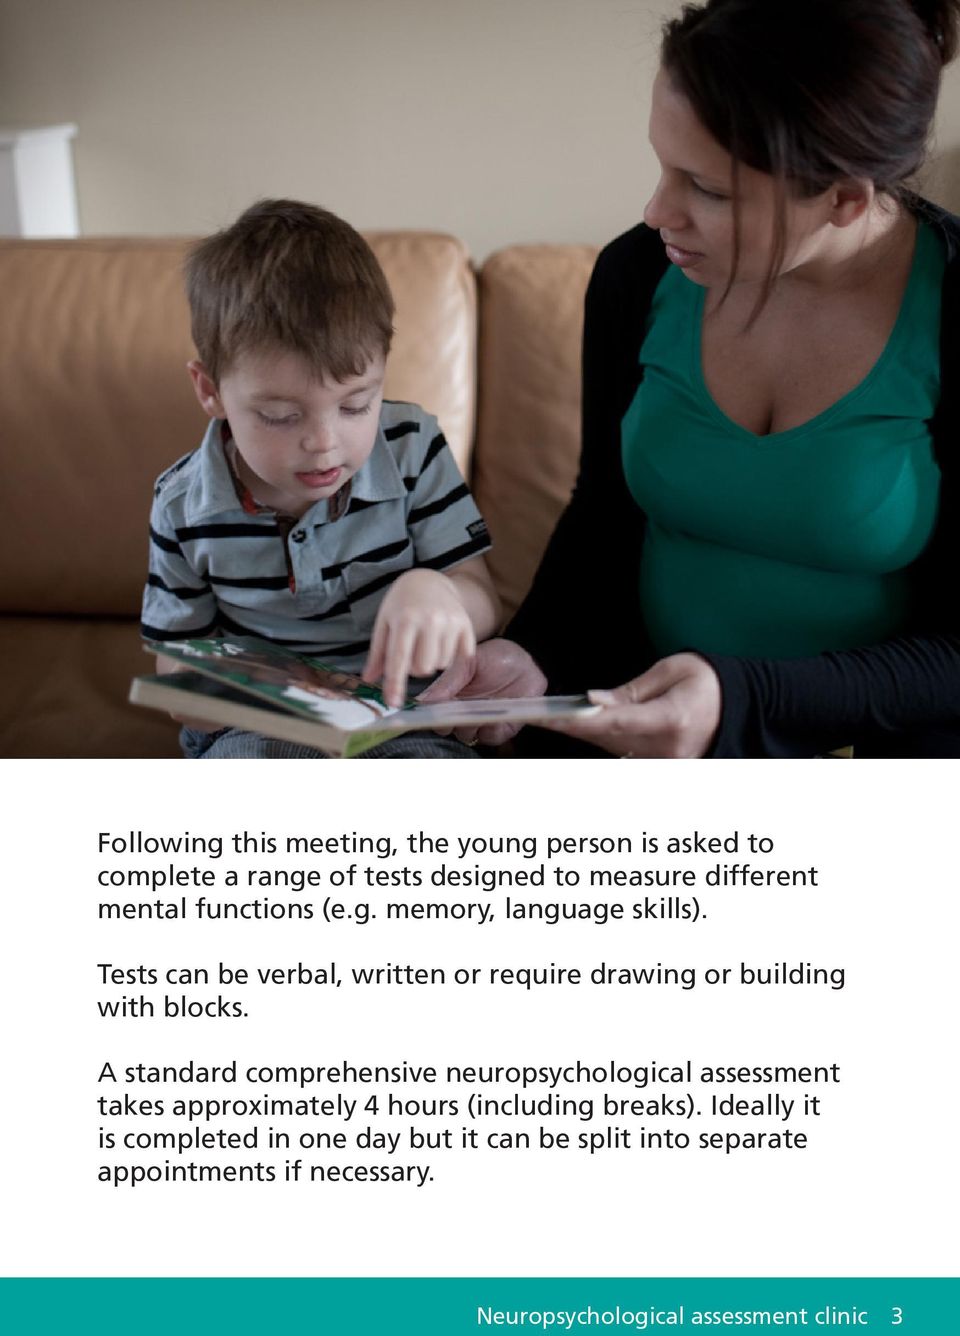 A standard comprehensive neuropsychological assessment takes approximately 4 hours (including breaks).